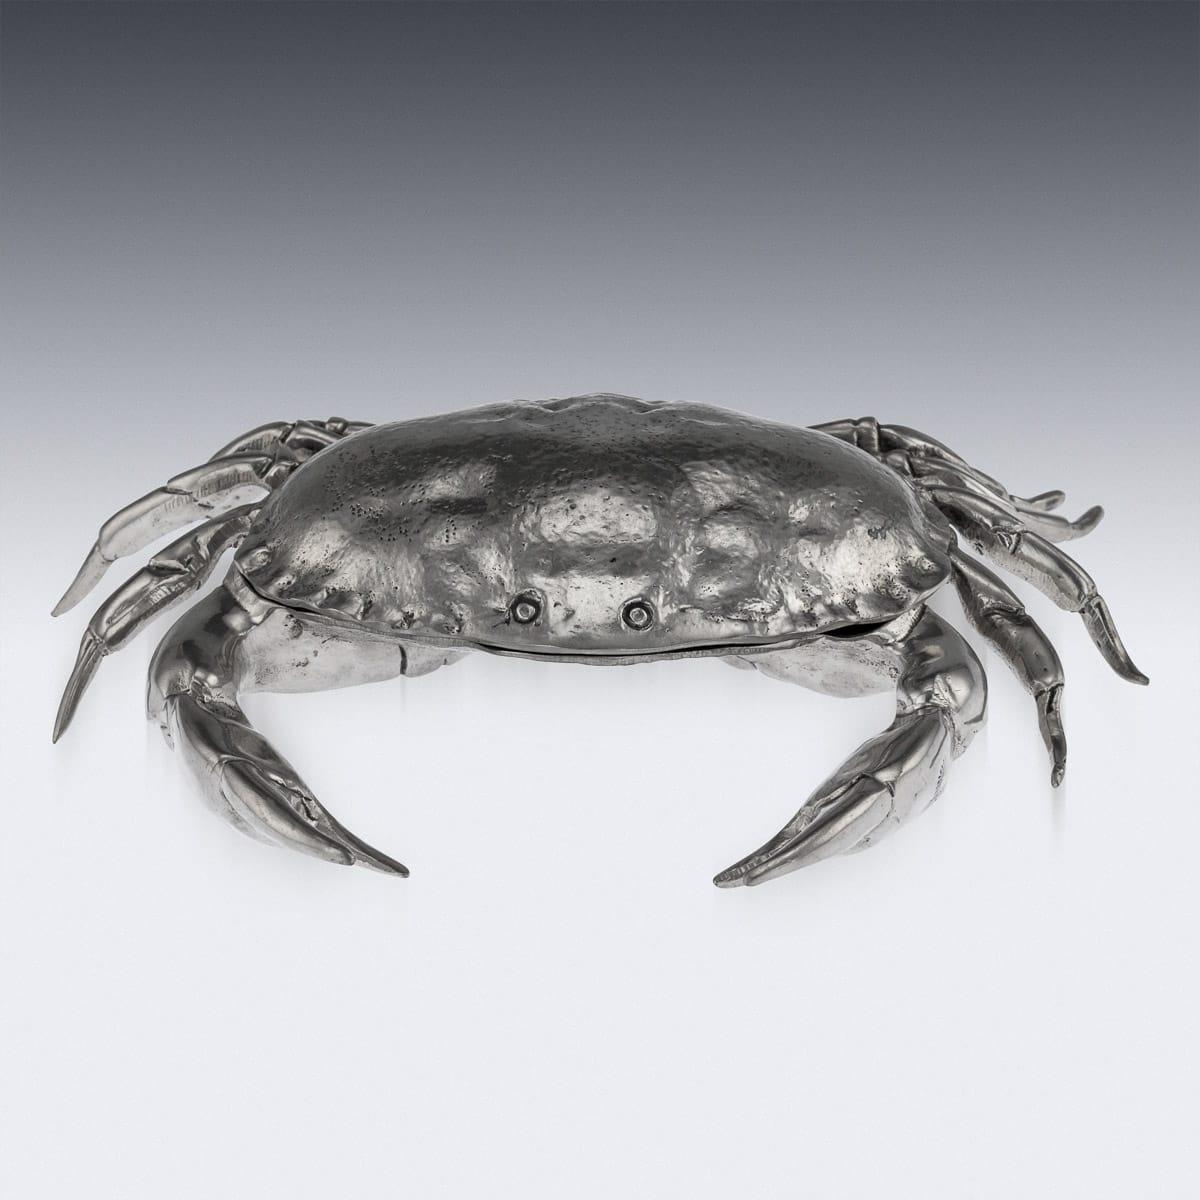 20th century Italian large and unusual caviar serving dish with a serving spoon, in the form of a crab, realistically modelled and textured, the top shell hinged onto a caviar dish, comes with a shell shaped caviar spoon. Hallmarked ETAIN 95%